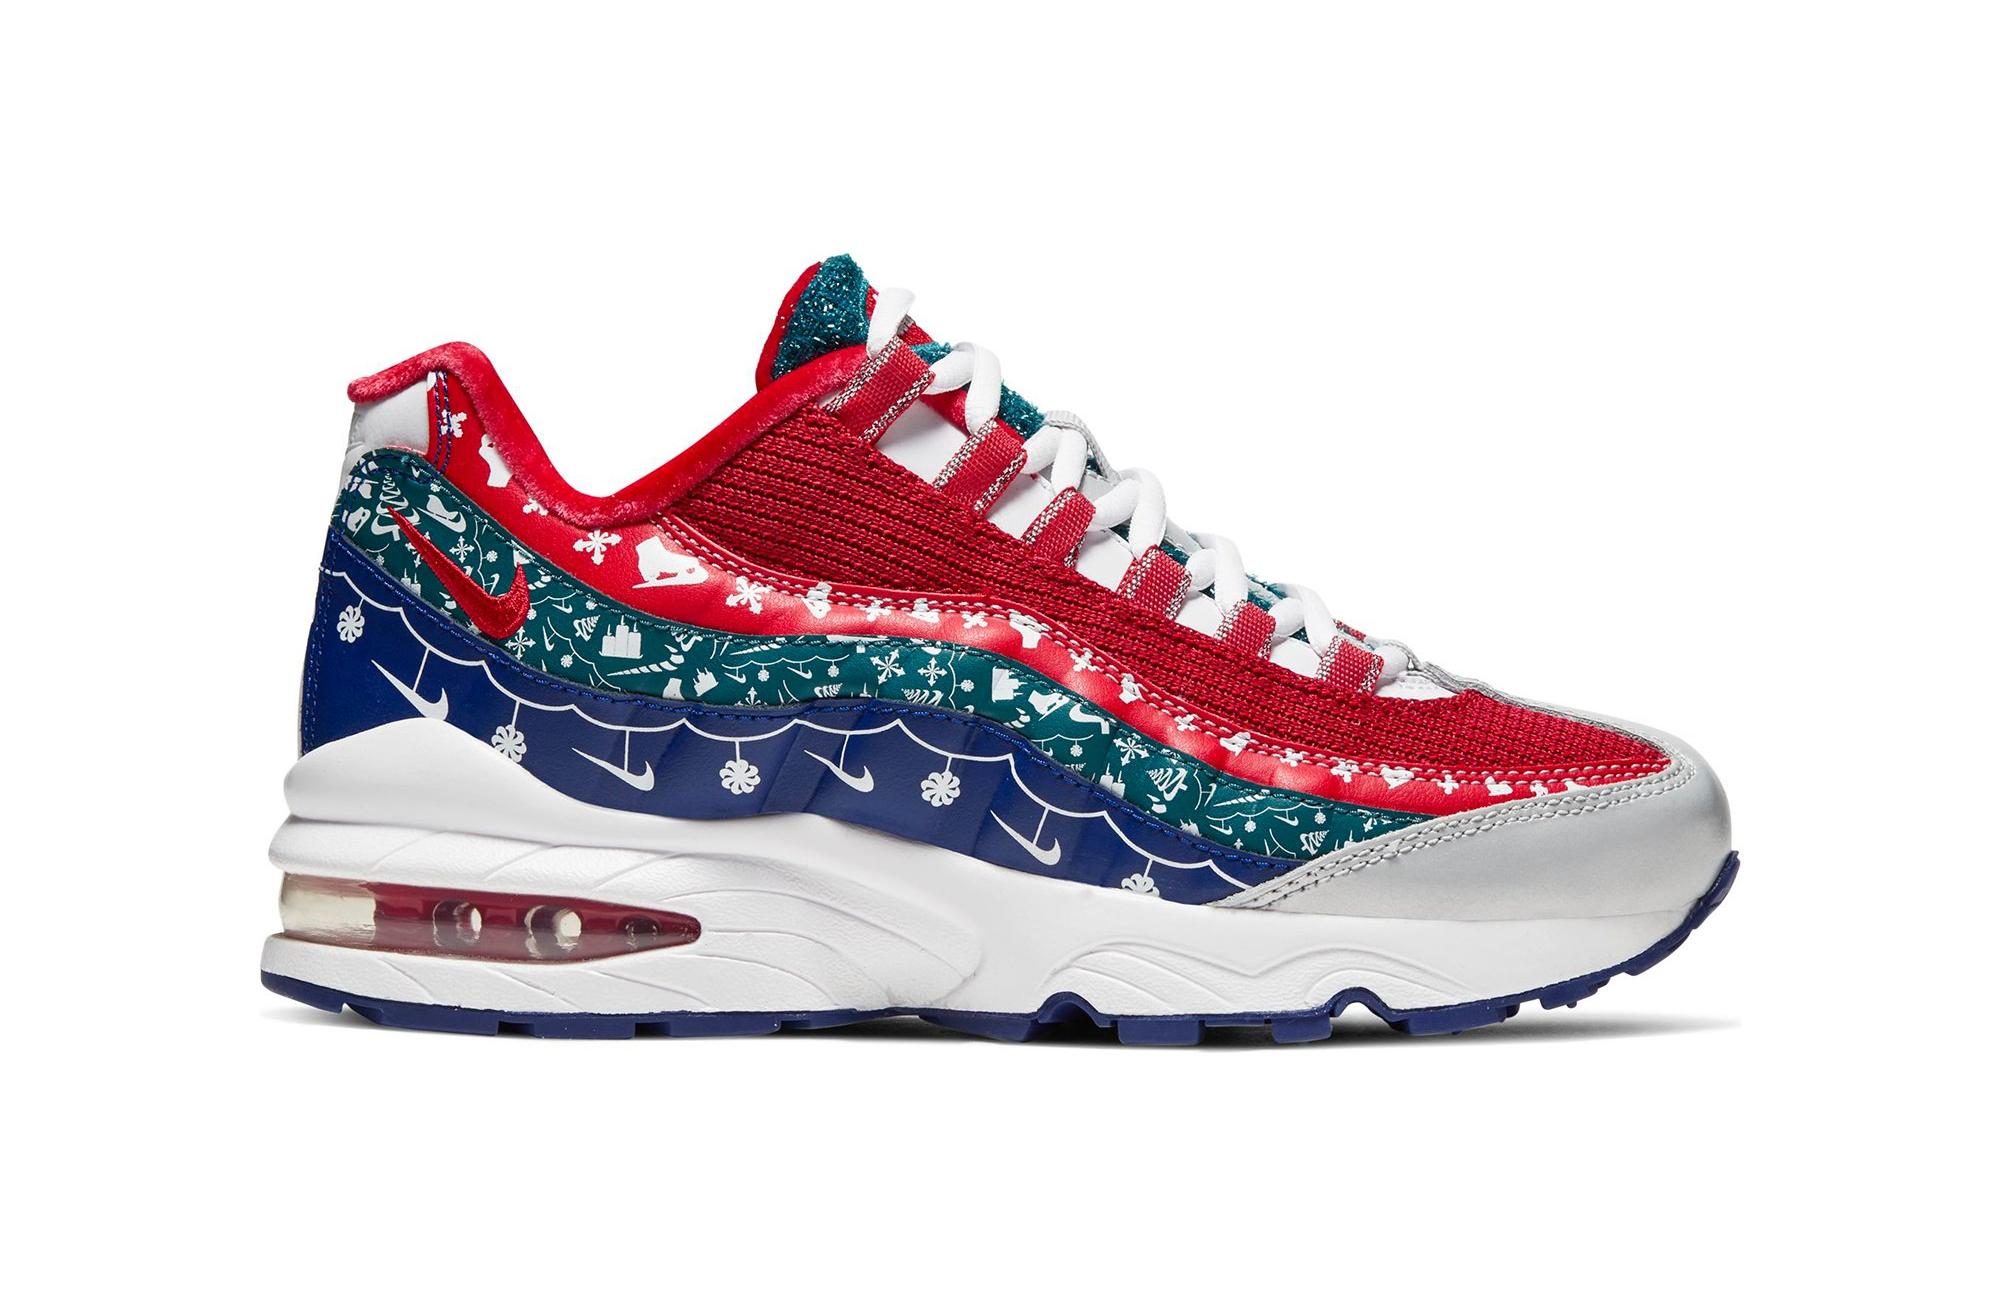 zij is hier weekend Sneakers Release &#8211; Nike Air Max 95 &#8220;Christmas White/Red&#8221;  Merry Swooshmas Shoes